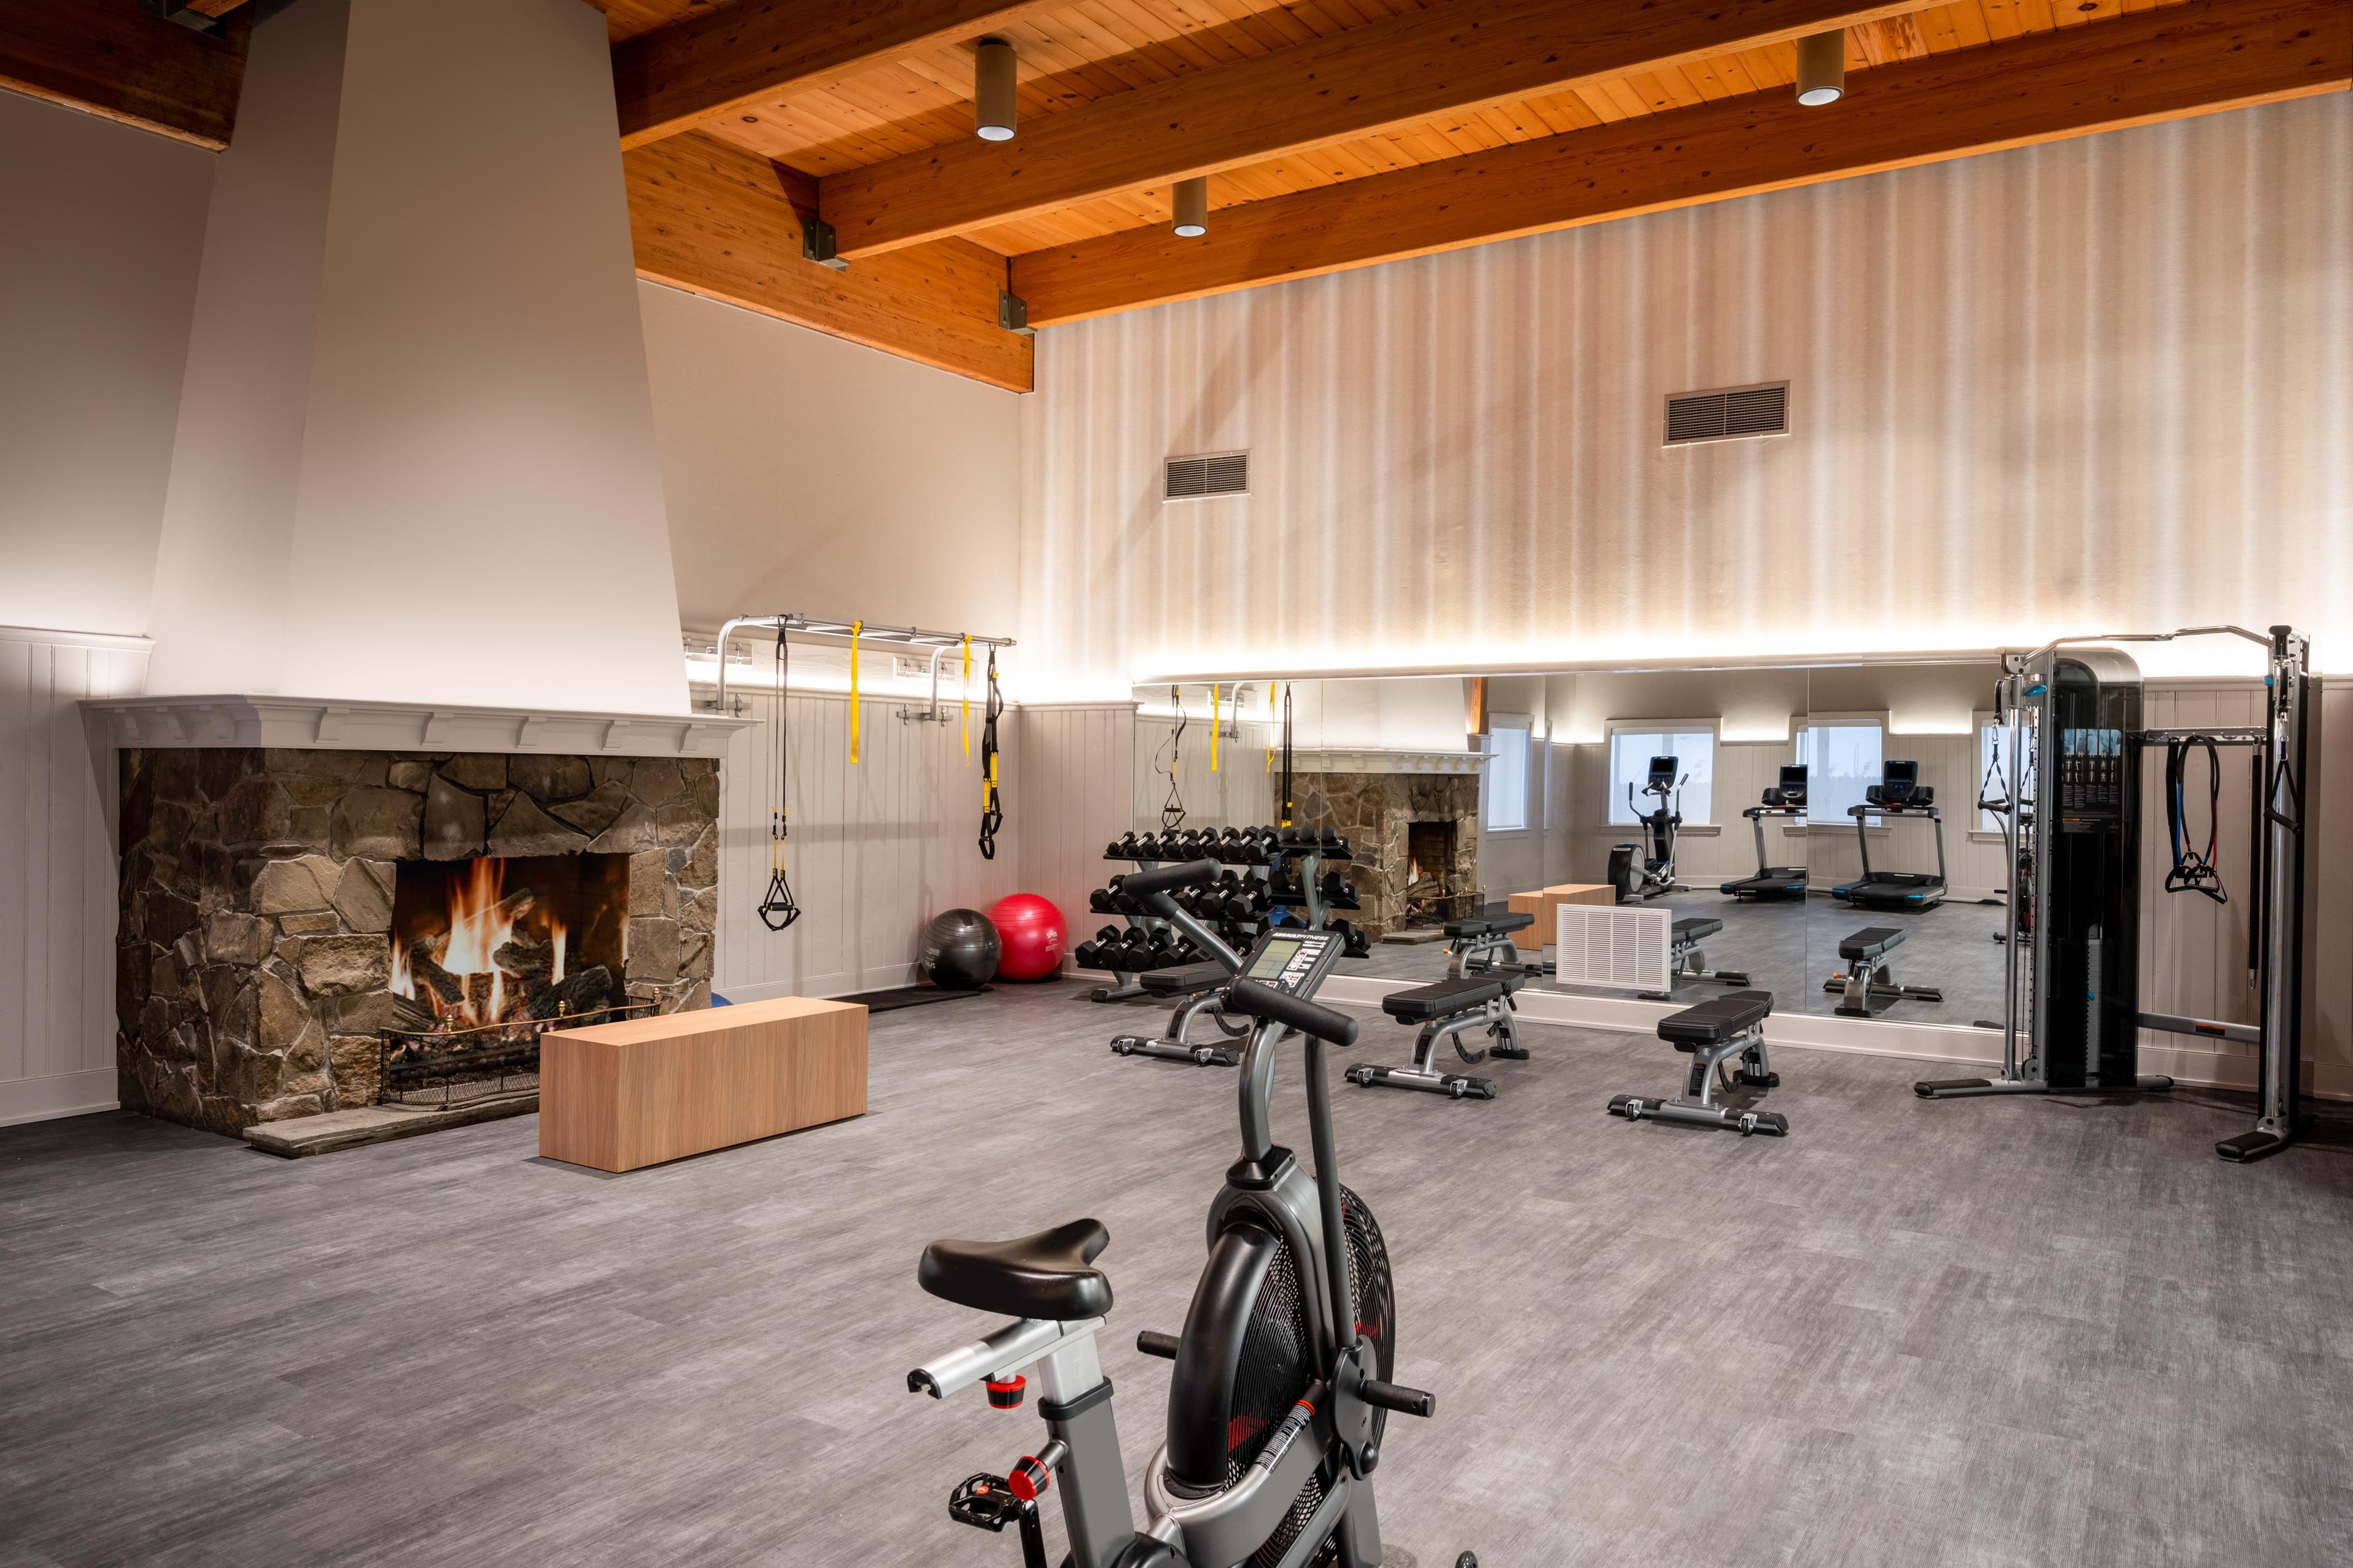 24-hour fitness center with all new equipment